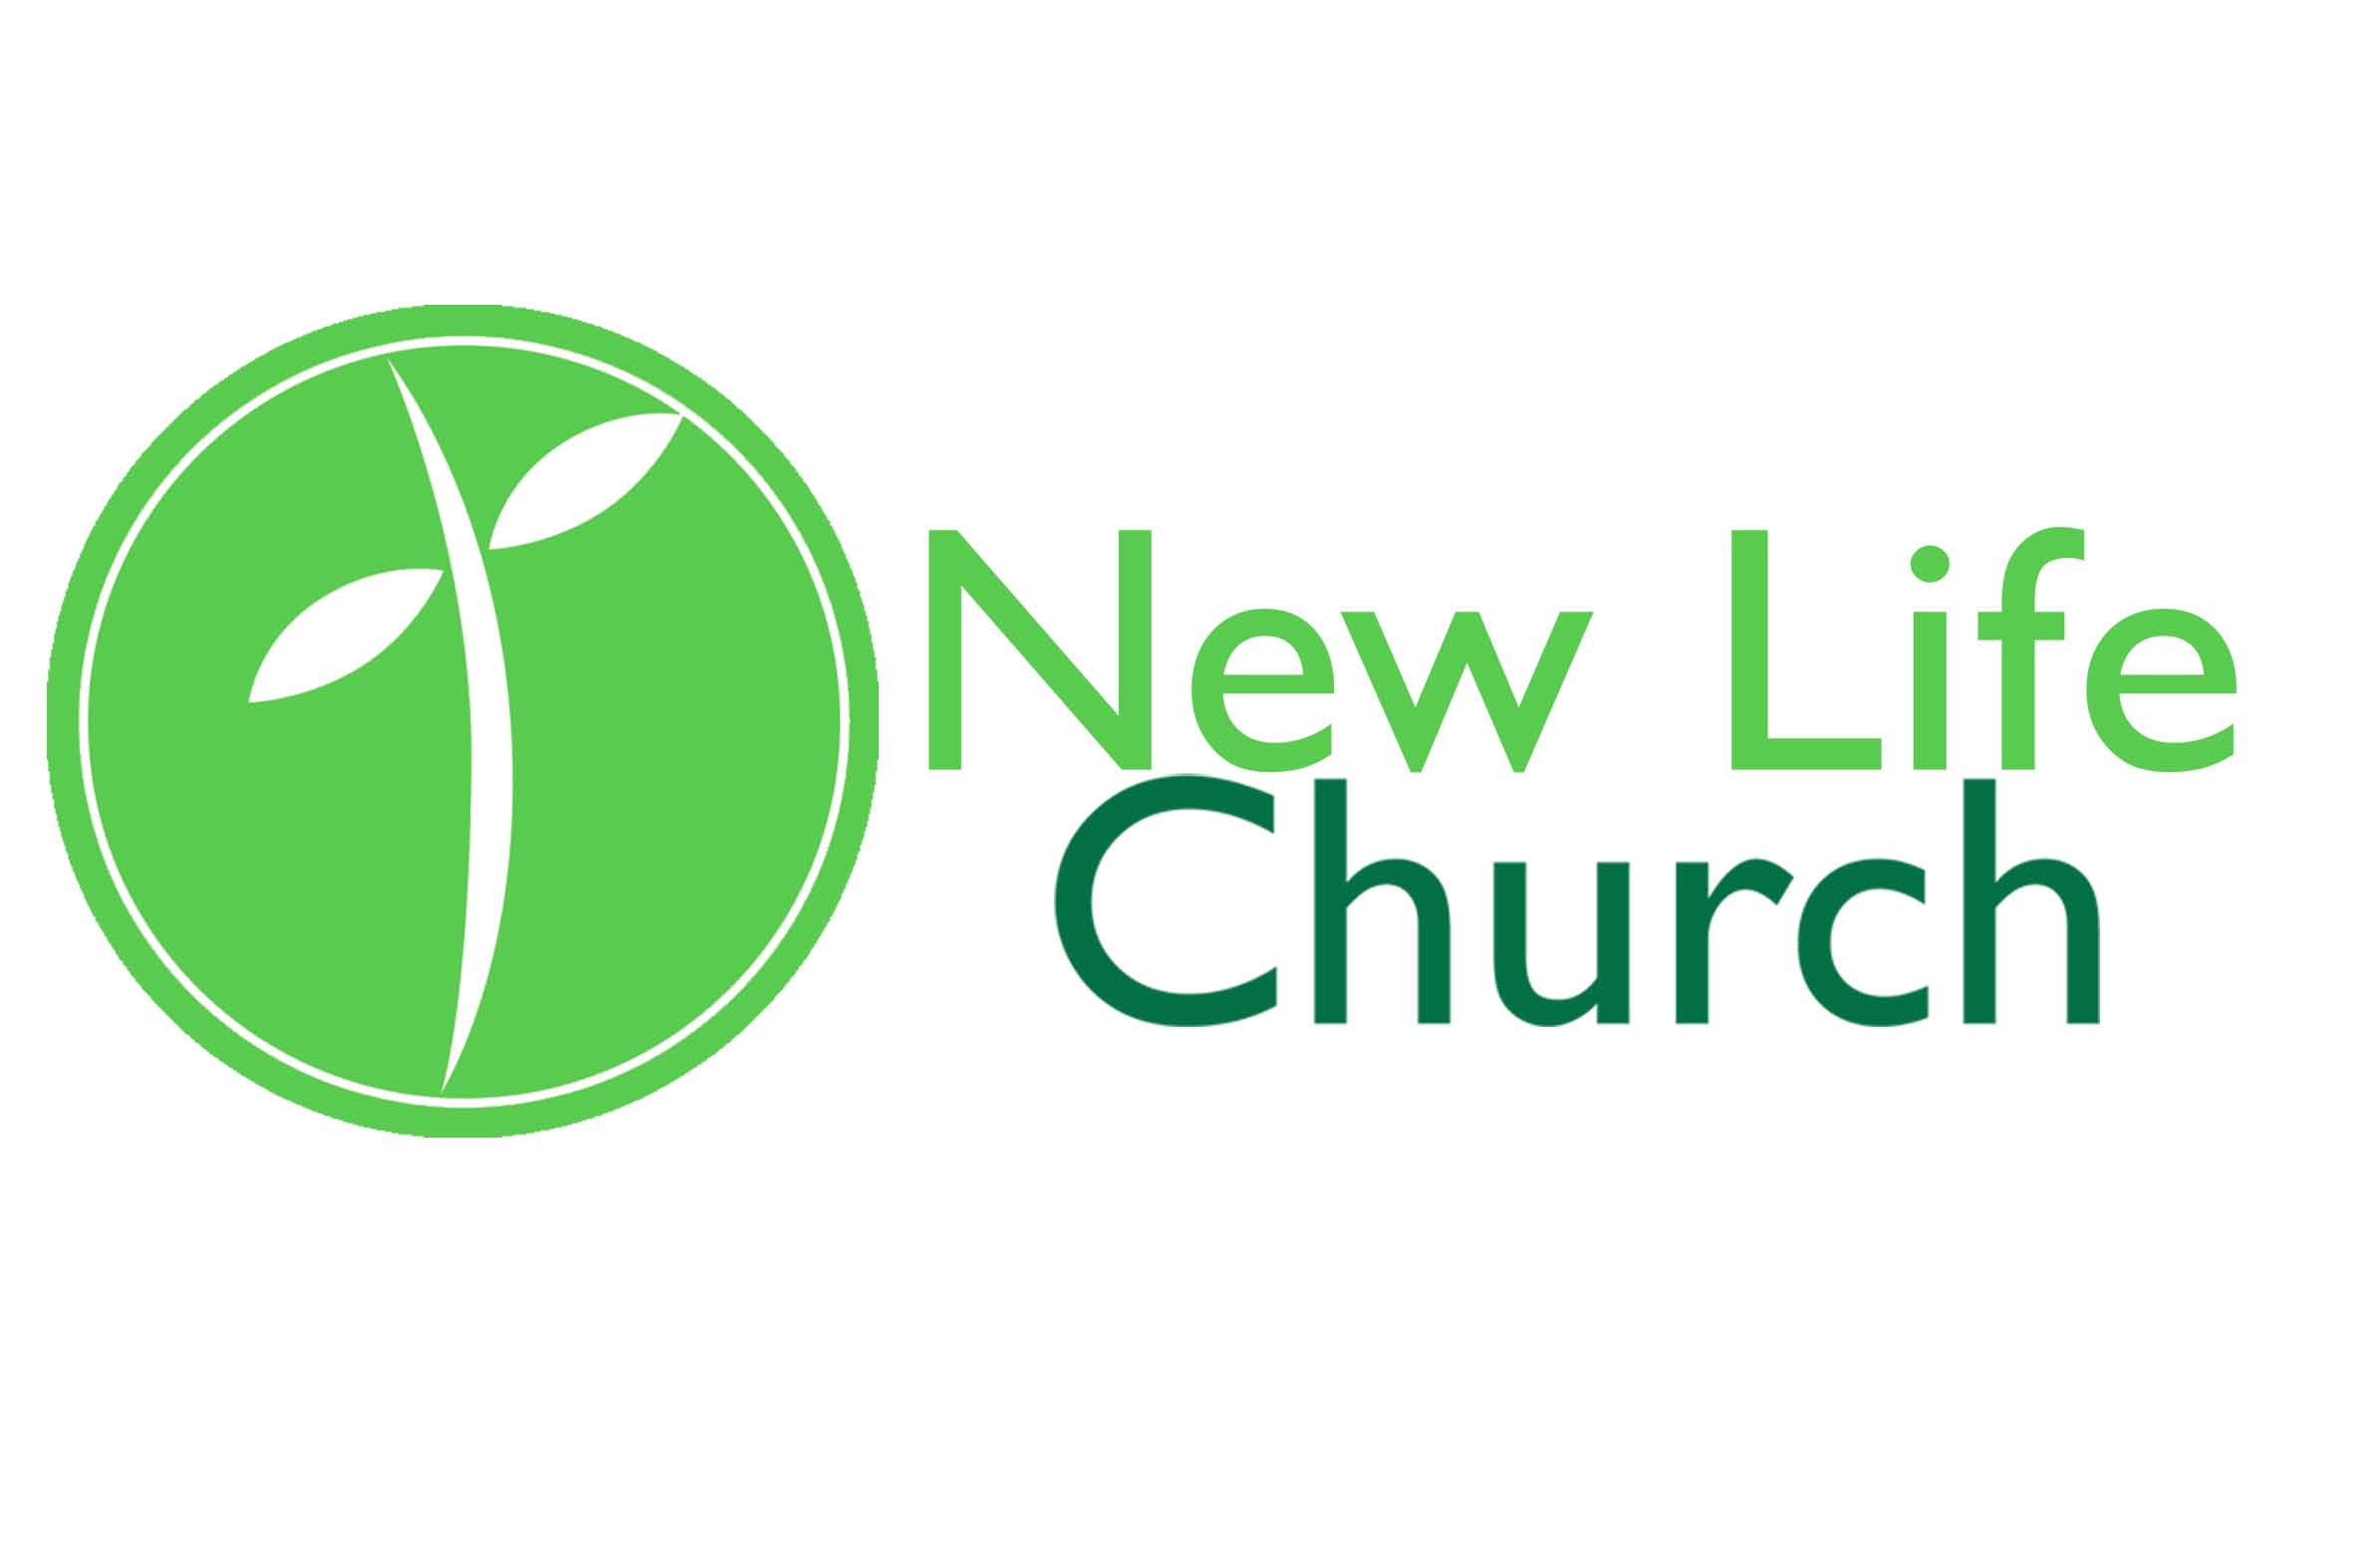 More Church Jobs, Ministry Jobs, and Pastor Jobs